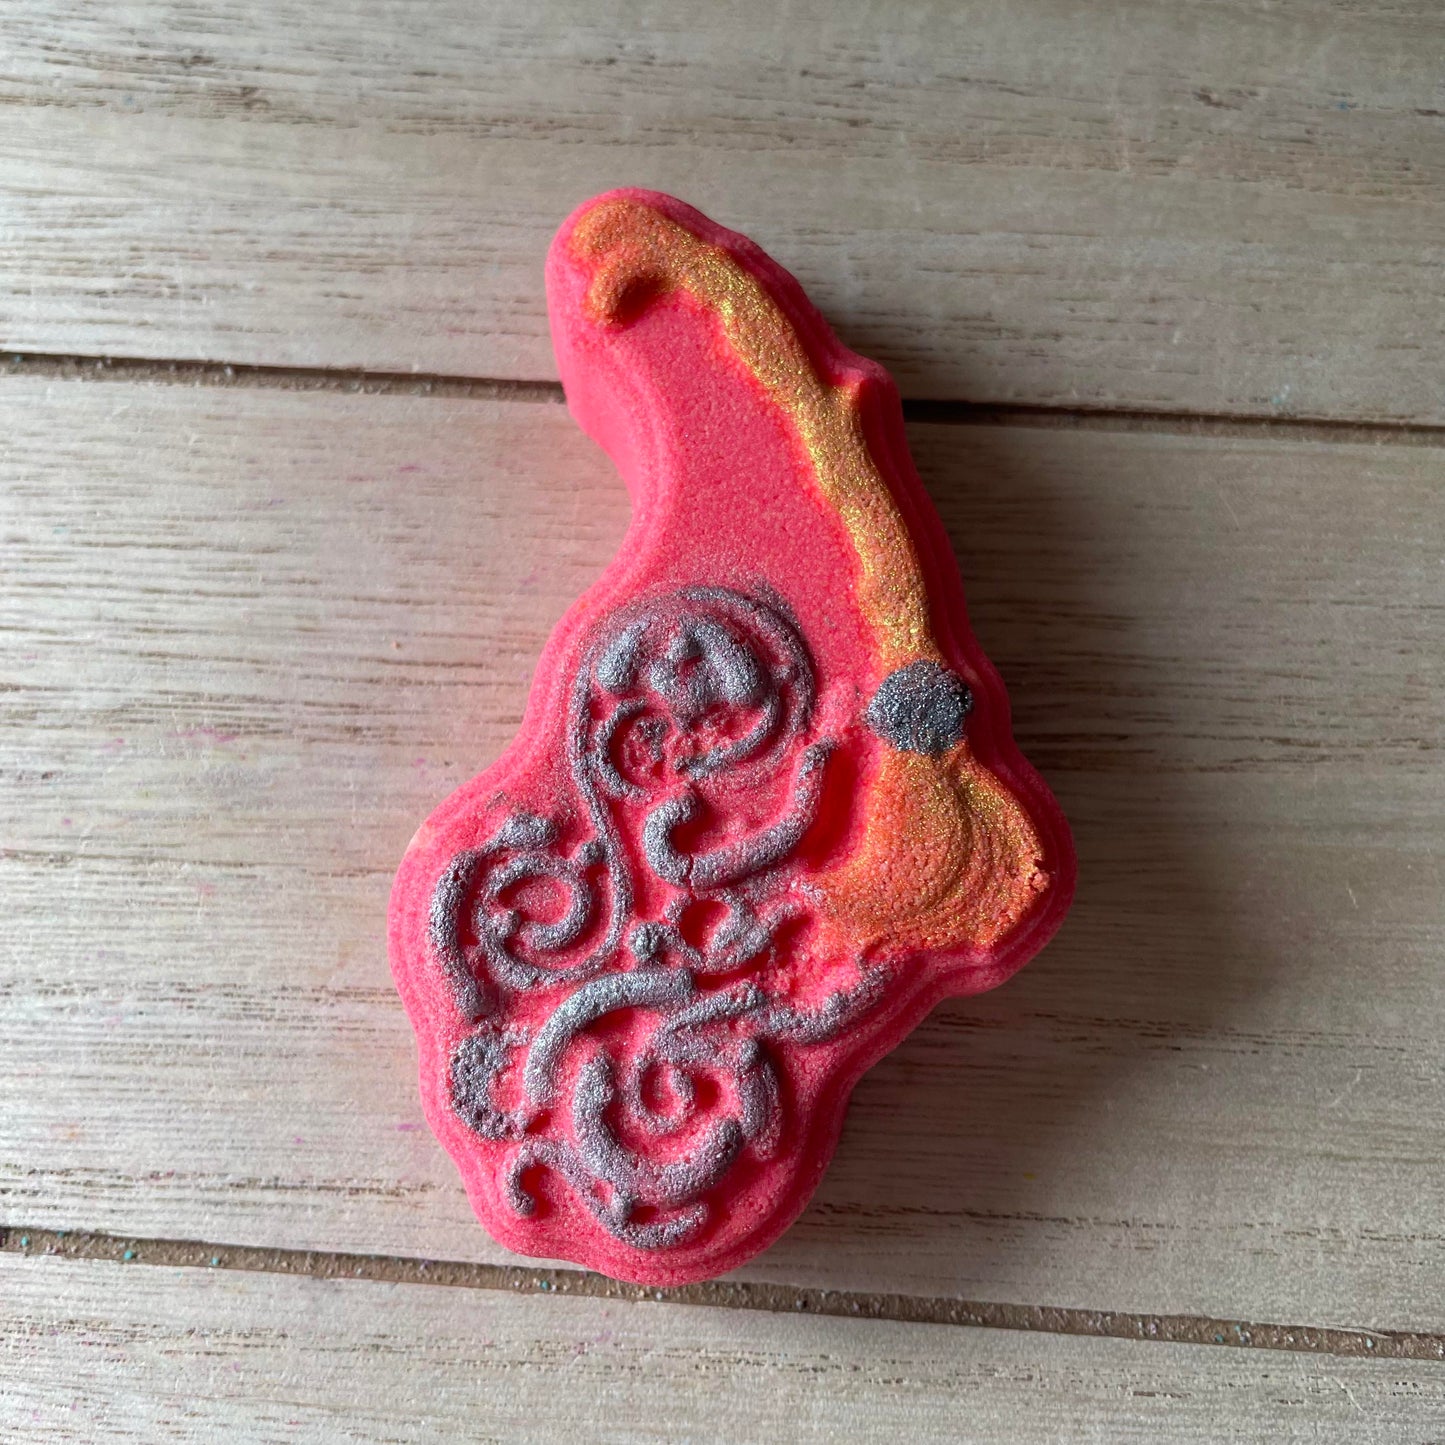 Magical Witches Broom Hybrid Mold